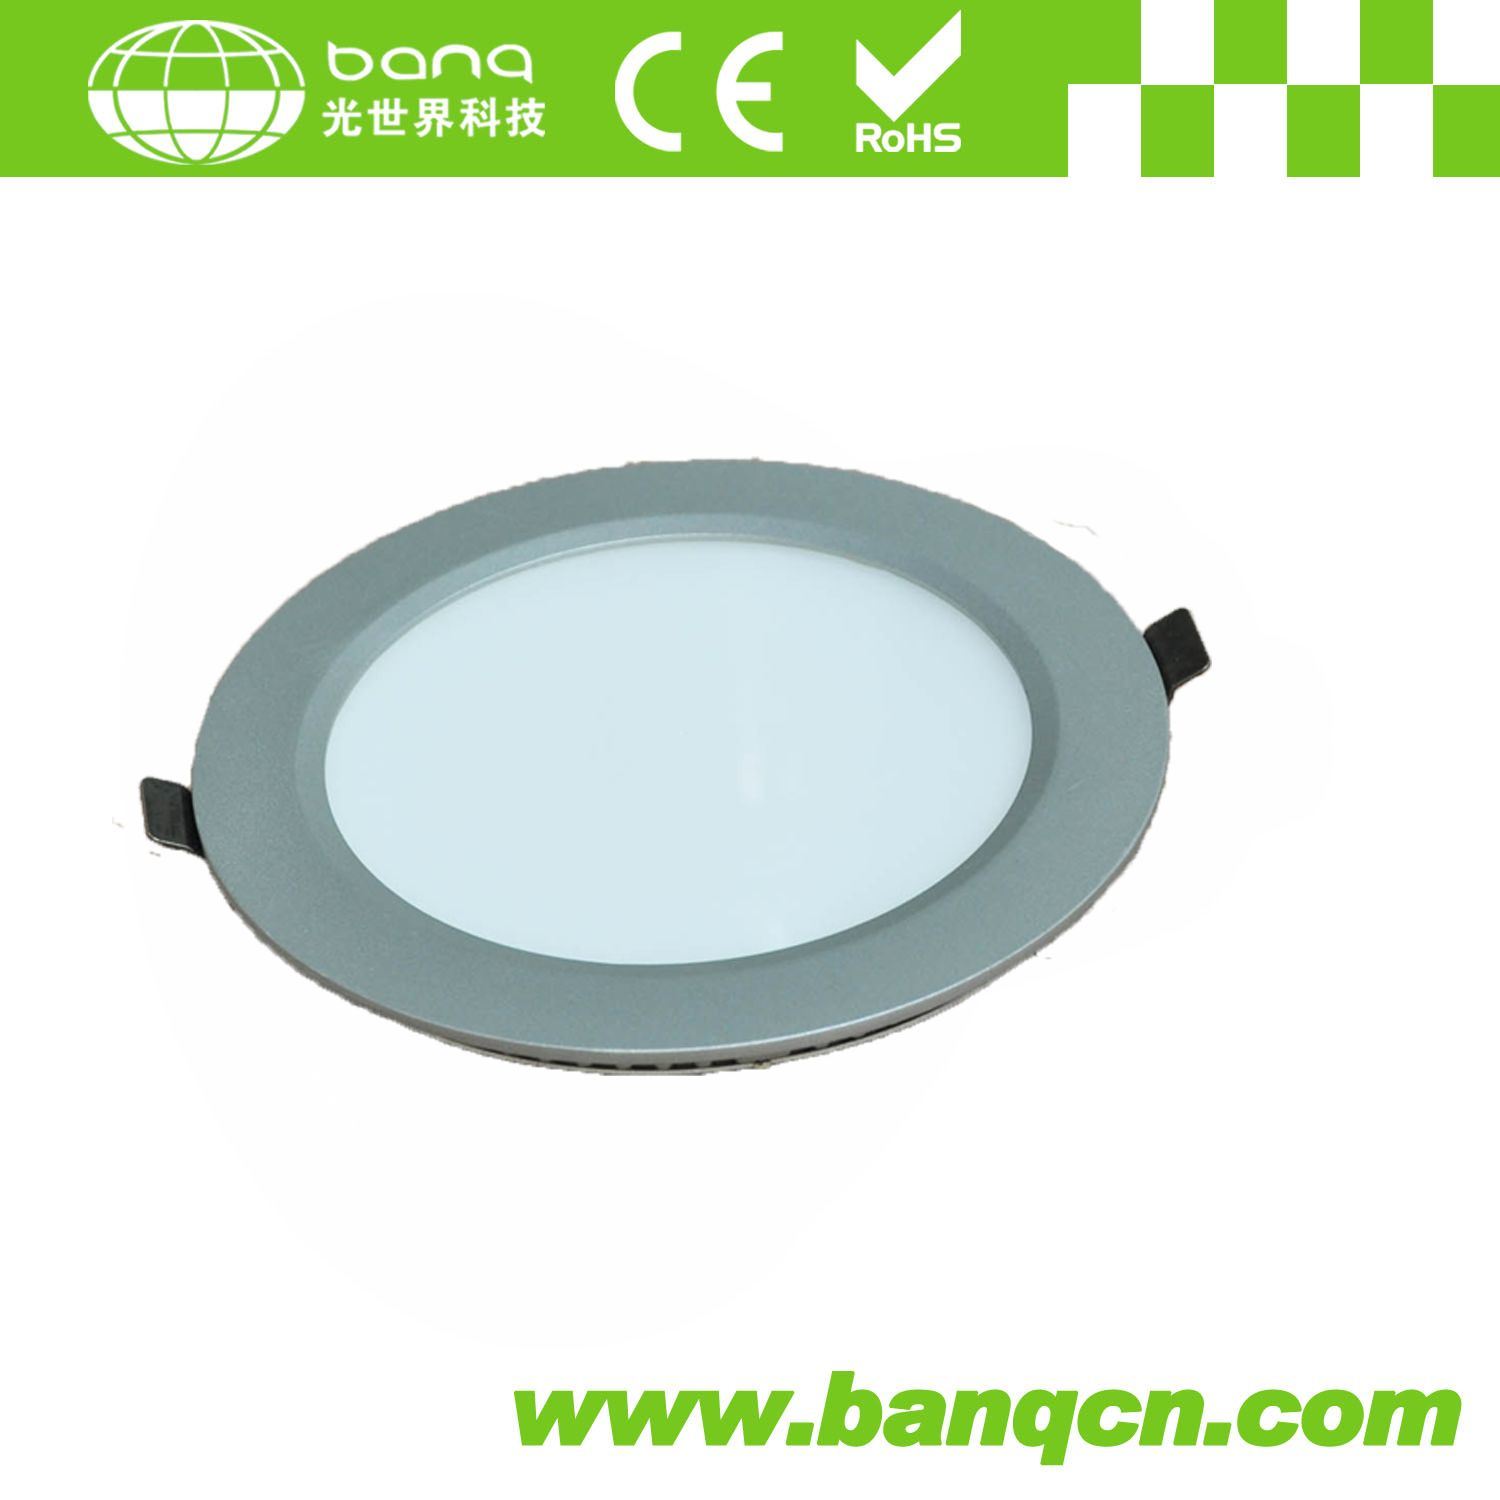 15W 10inch LED Round Panel Light for Indoor Lighting (CE/RoHS)